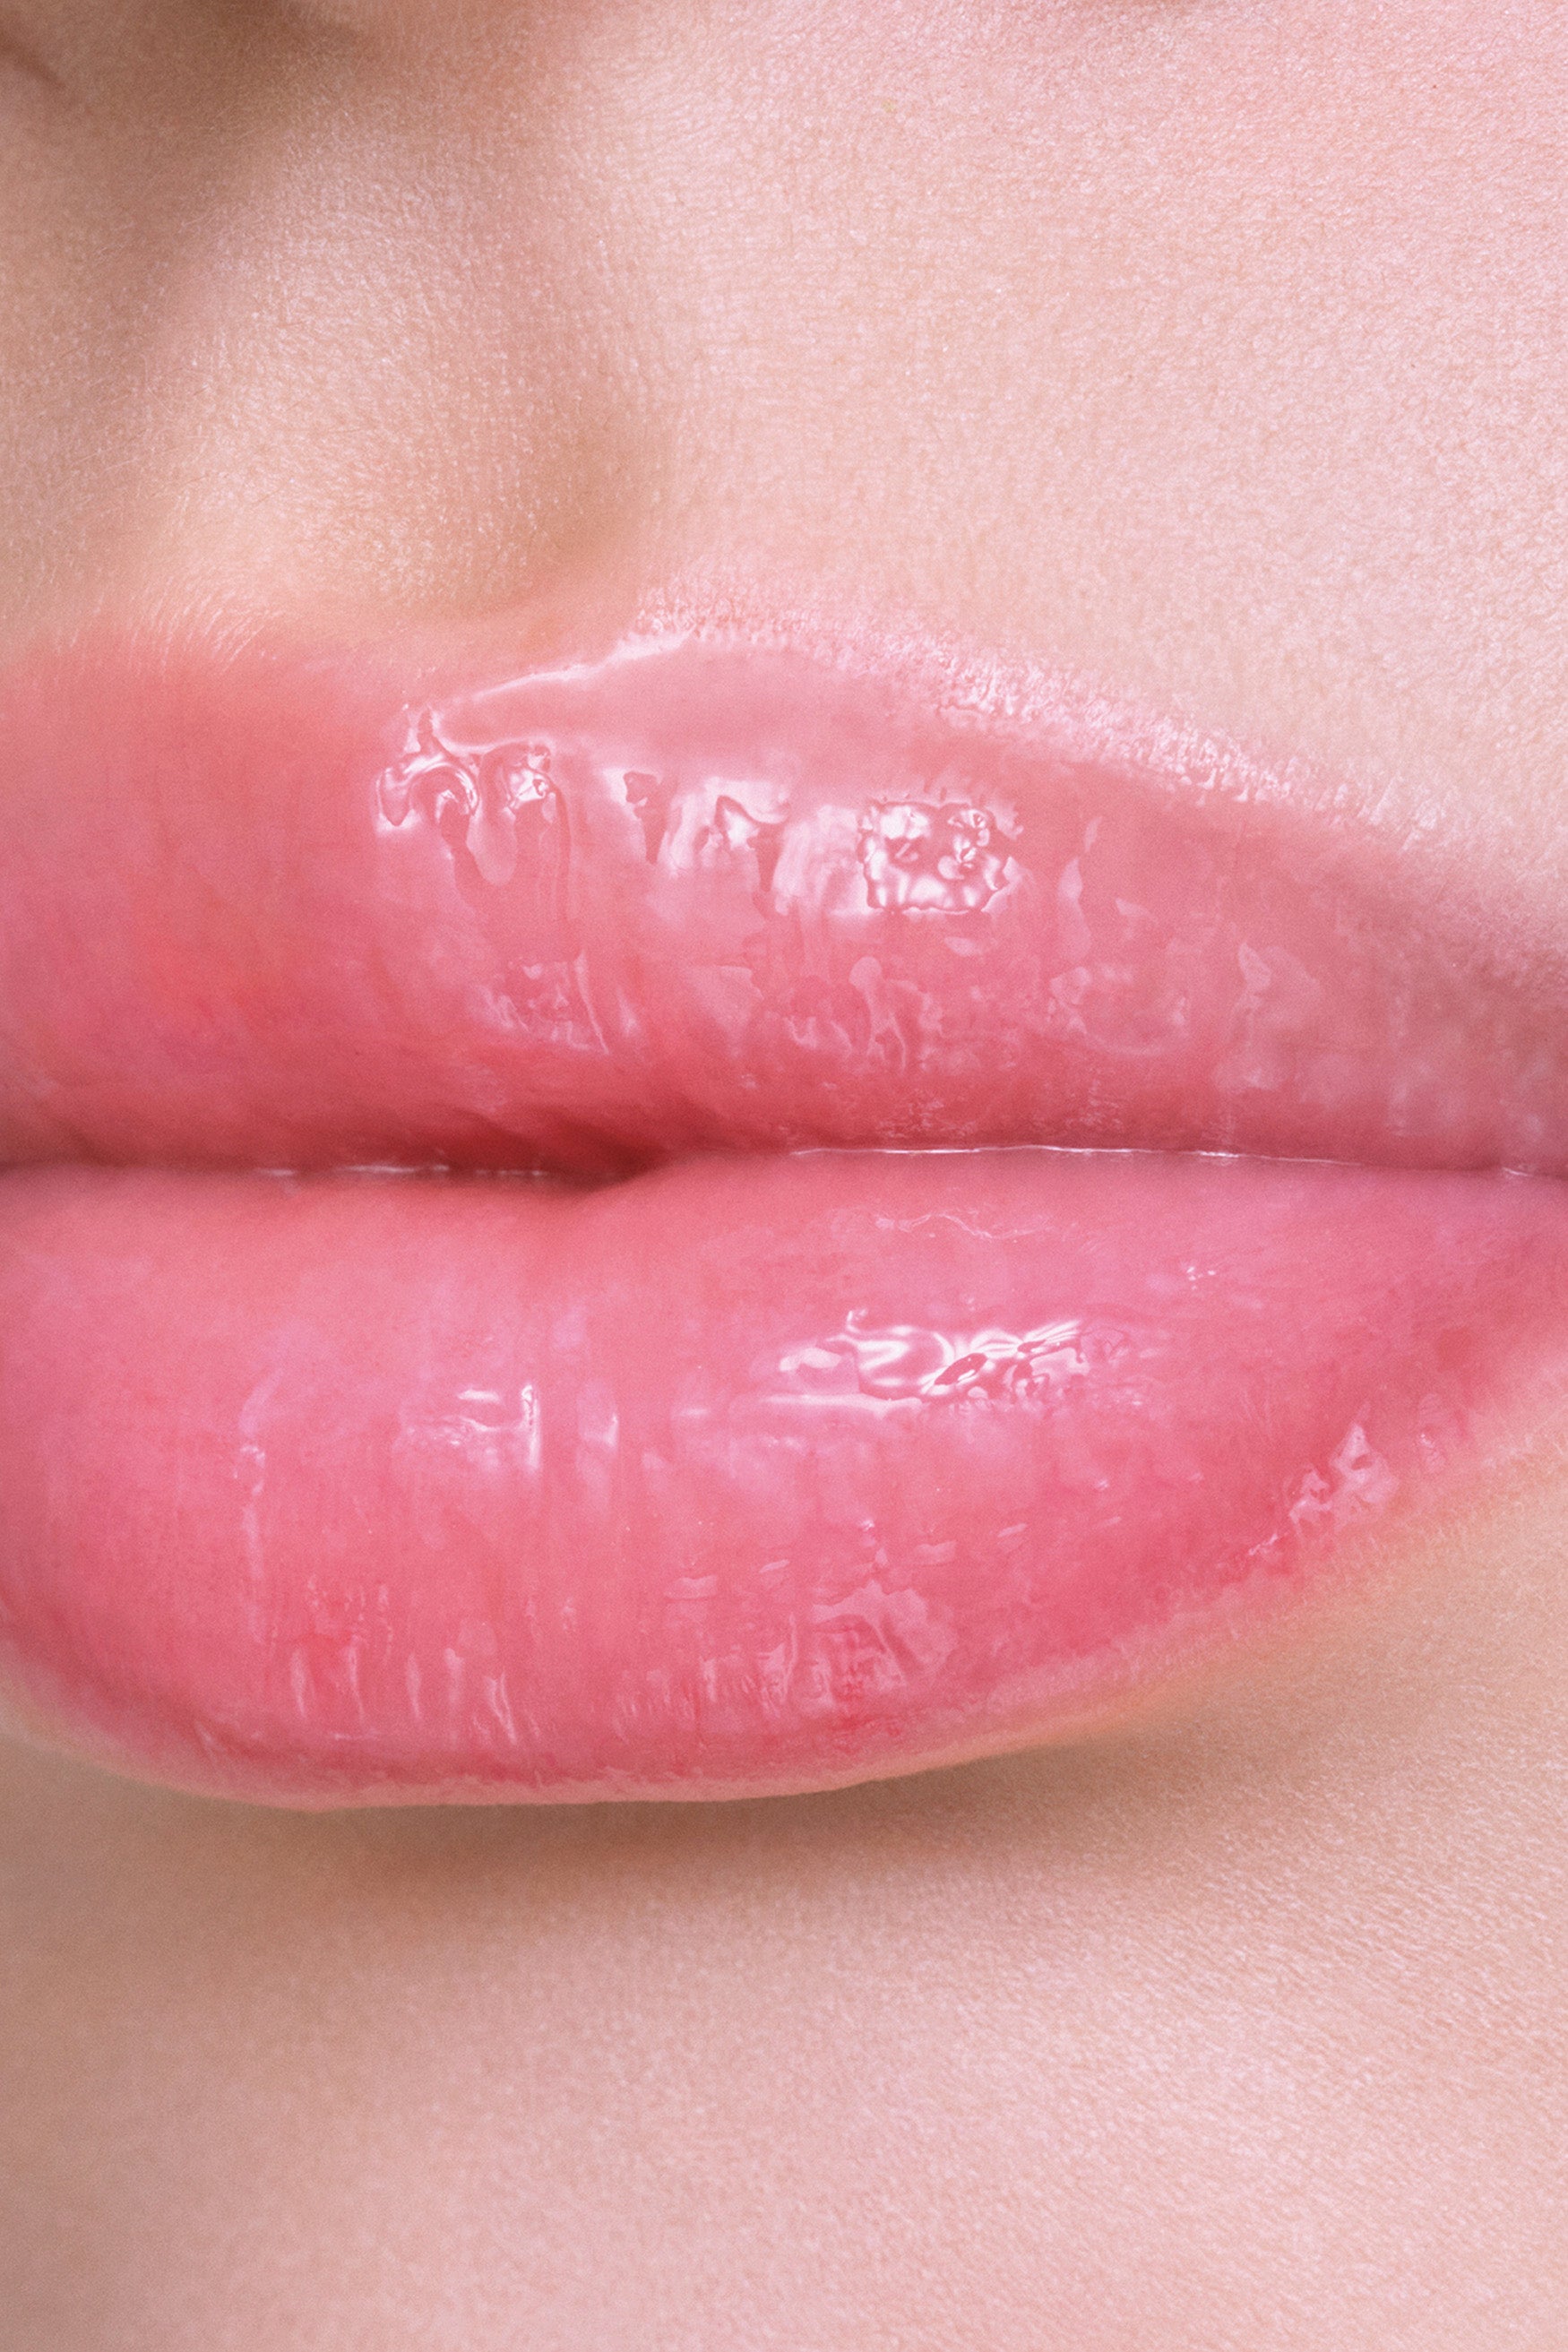 This lip with Prunus persica kernal oil – emollient gives your lips a natural and dewy tone